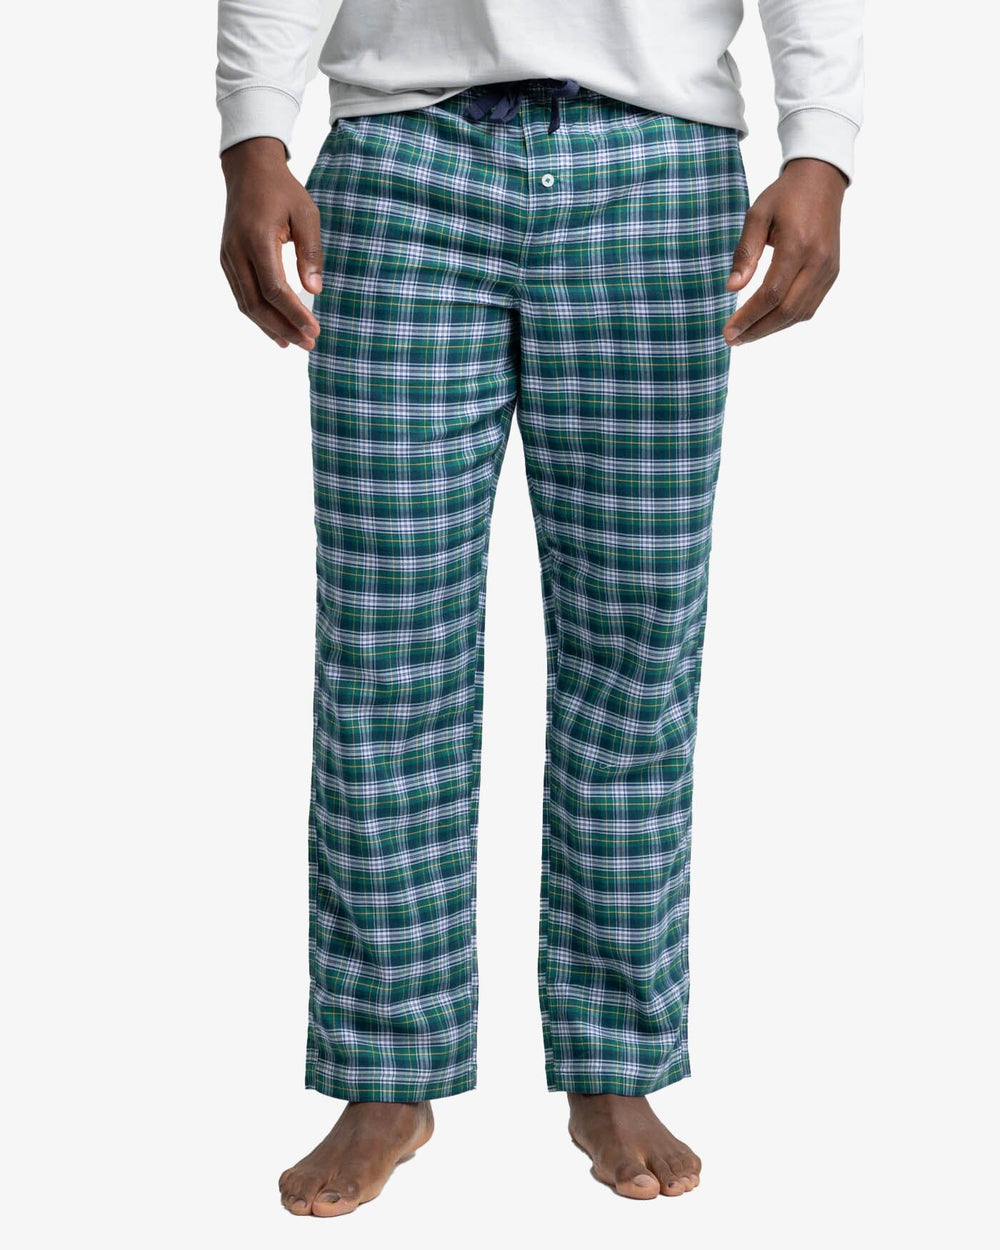 The front view of the Southern Tide Highmark Plaid Lounge Pant by Southern Tide - Georgian Bay Green